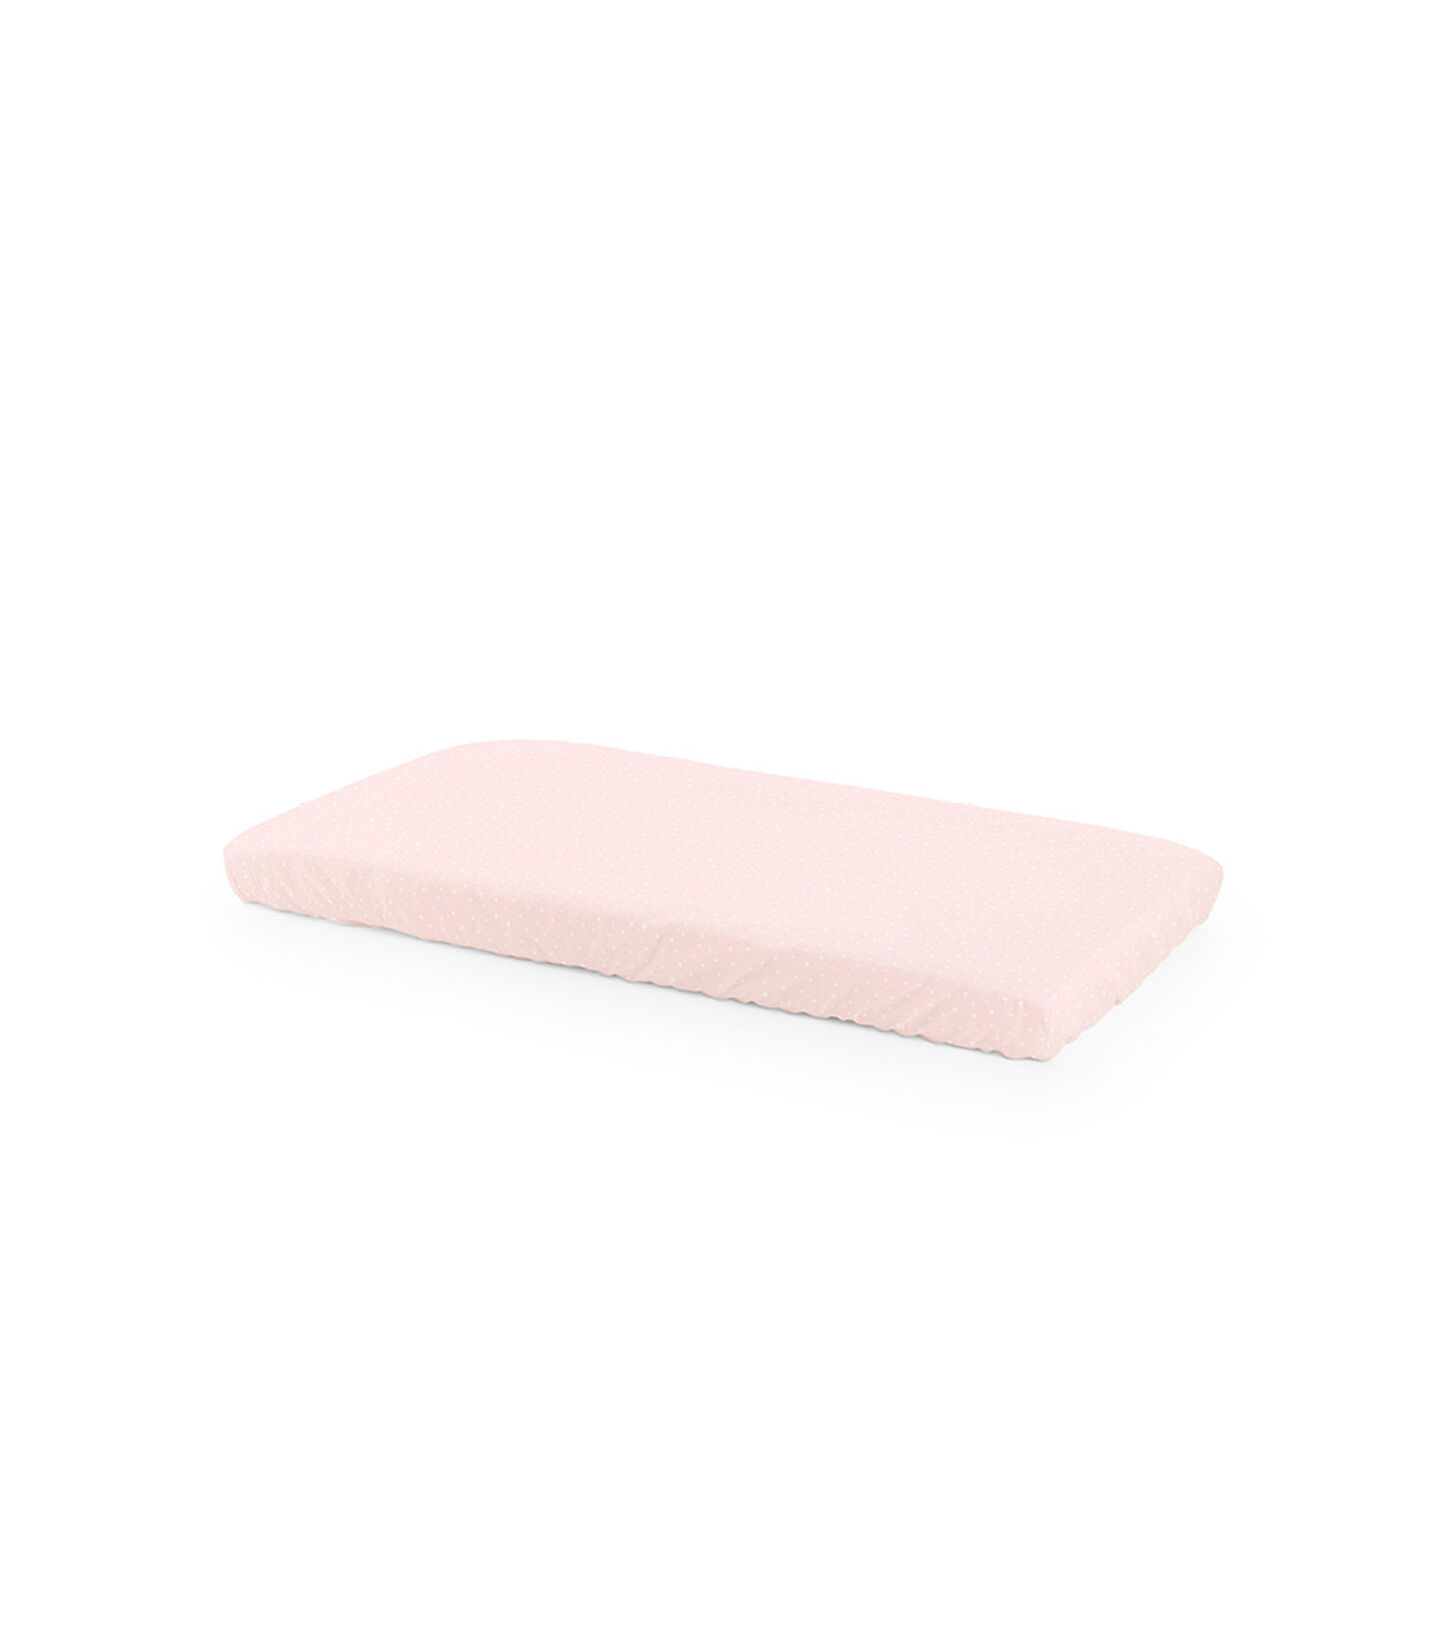 Stokke® Home™ Bed Fit Sheet Pink Bee, Розовые пчелки, mainview view 1